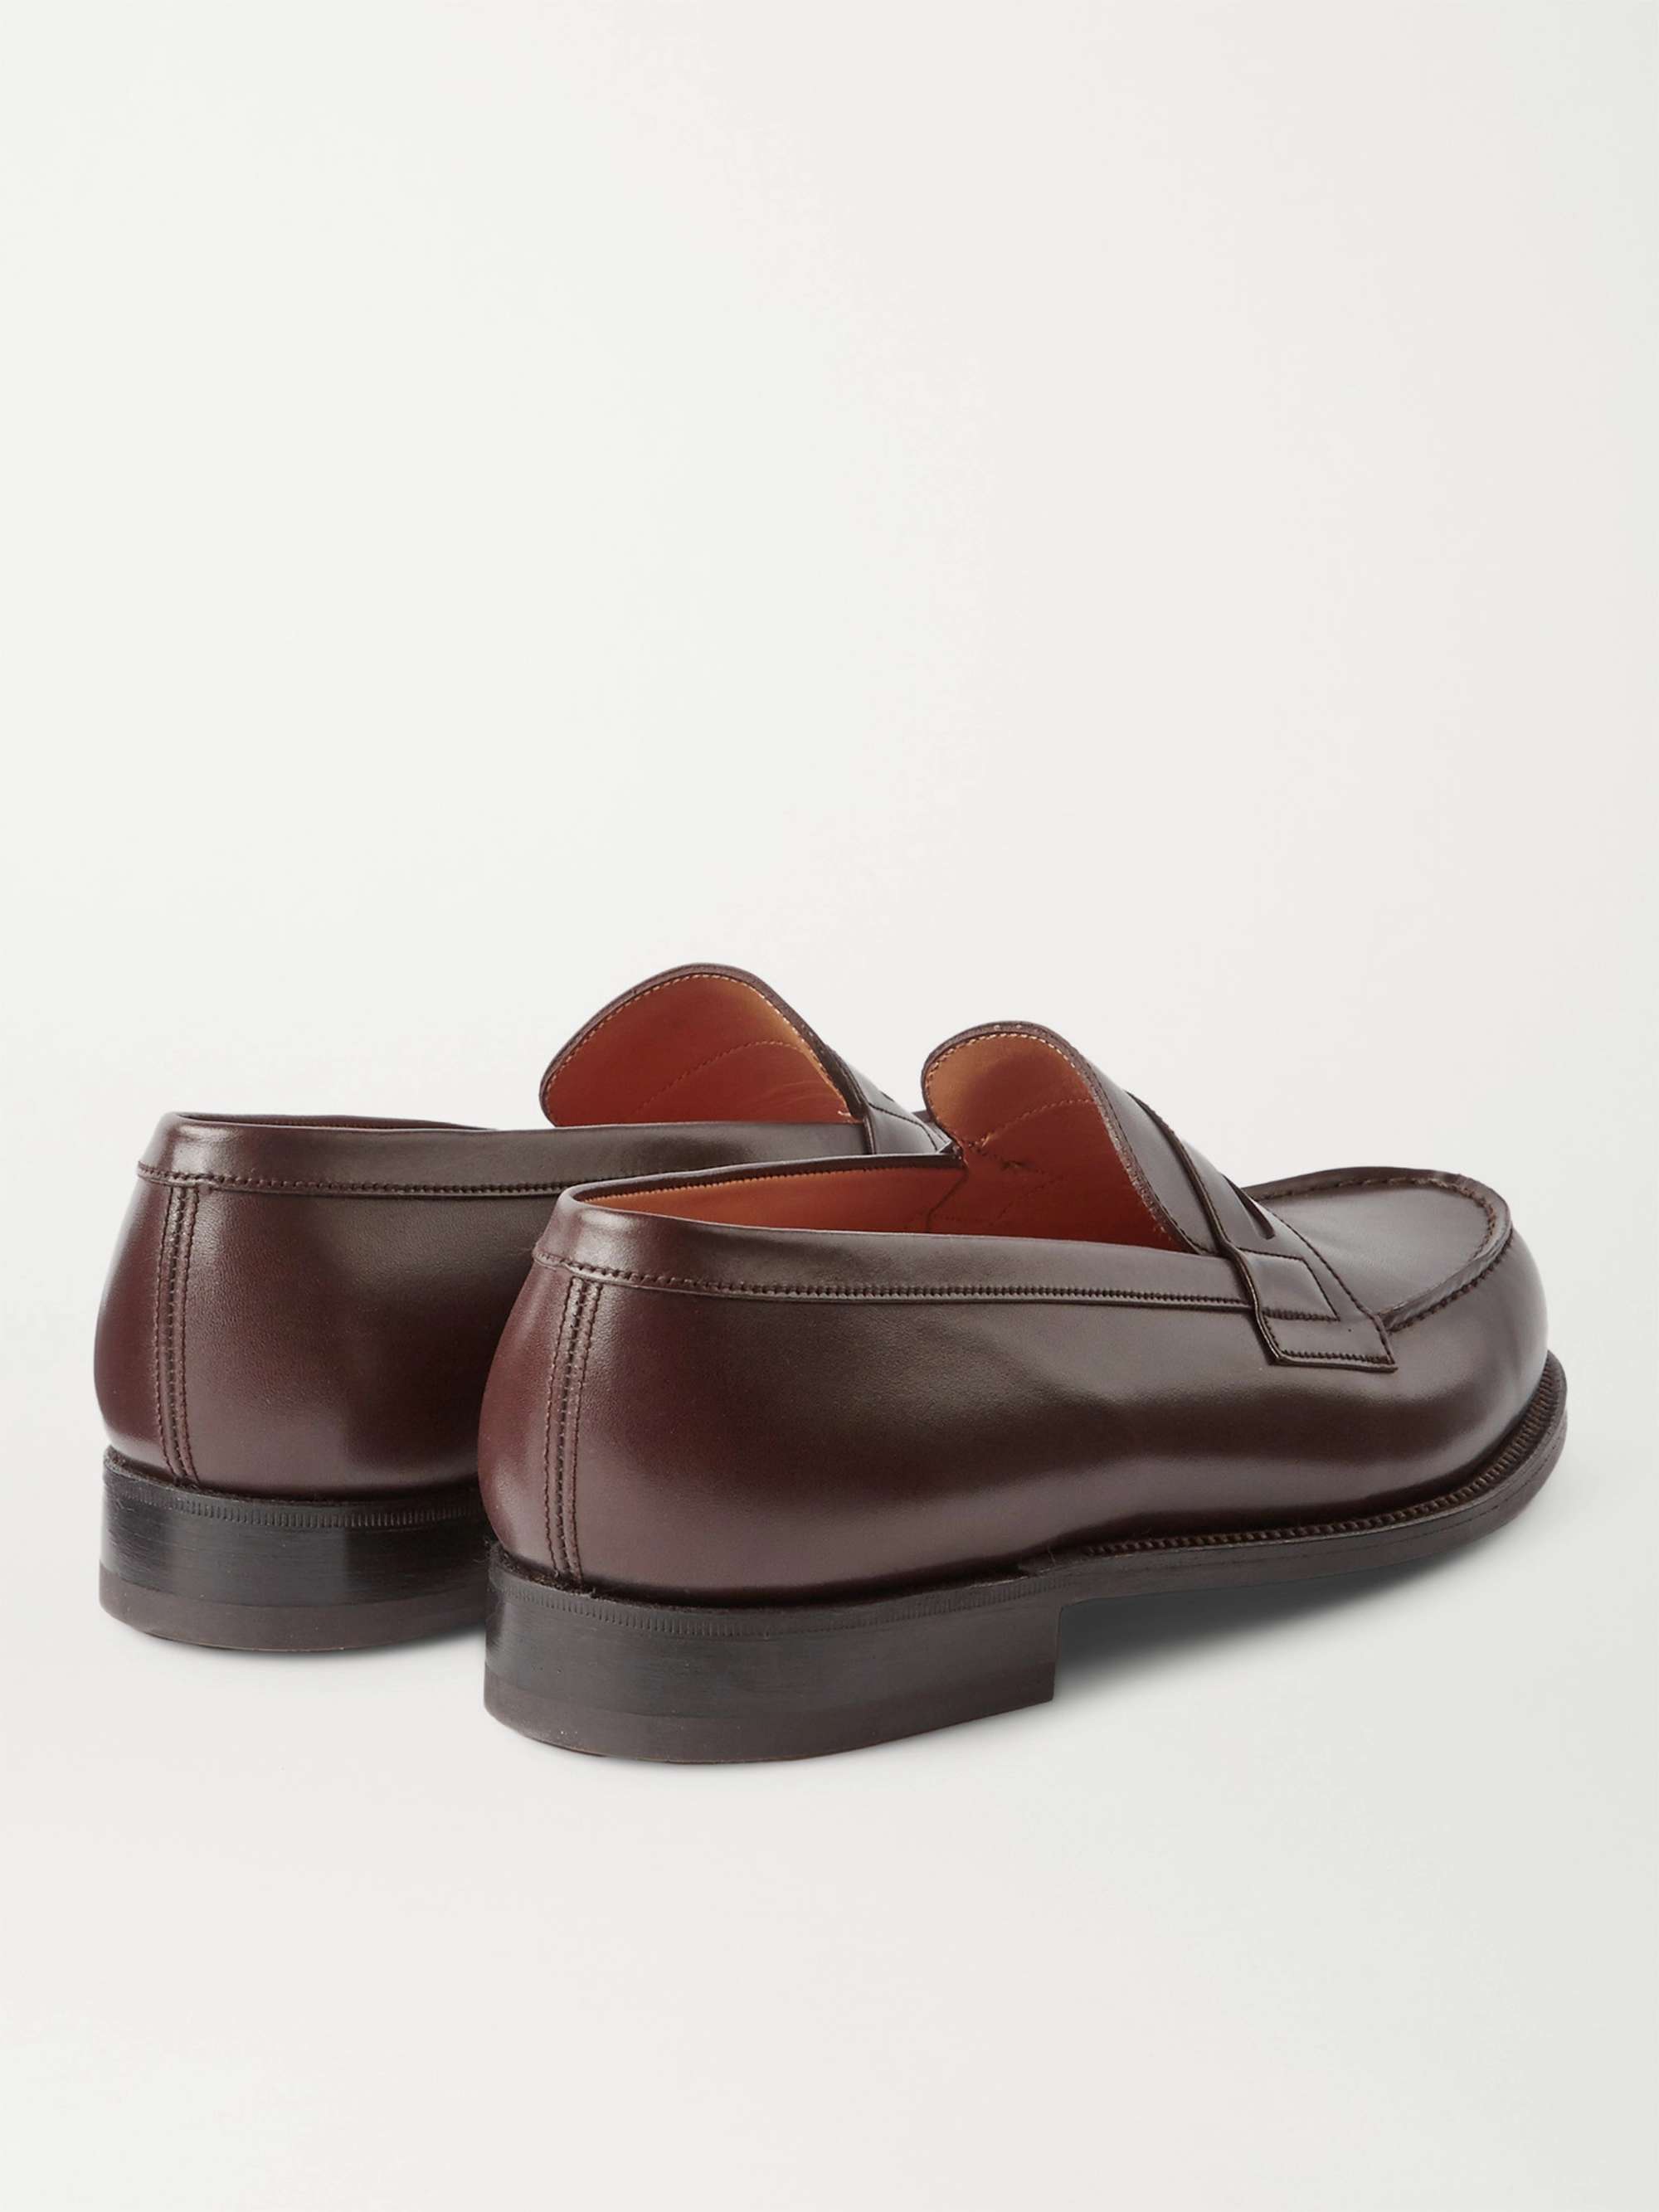 J.M. WESTON 180 Moccasin Leather Loafers